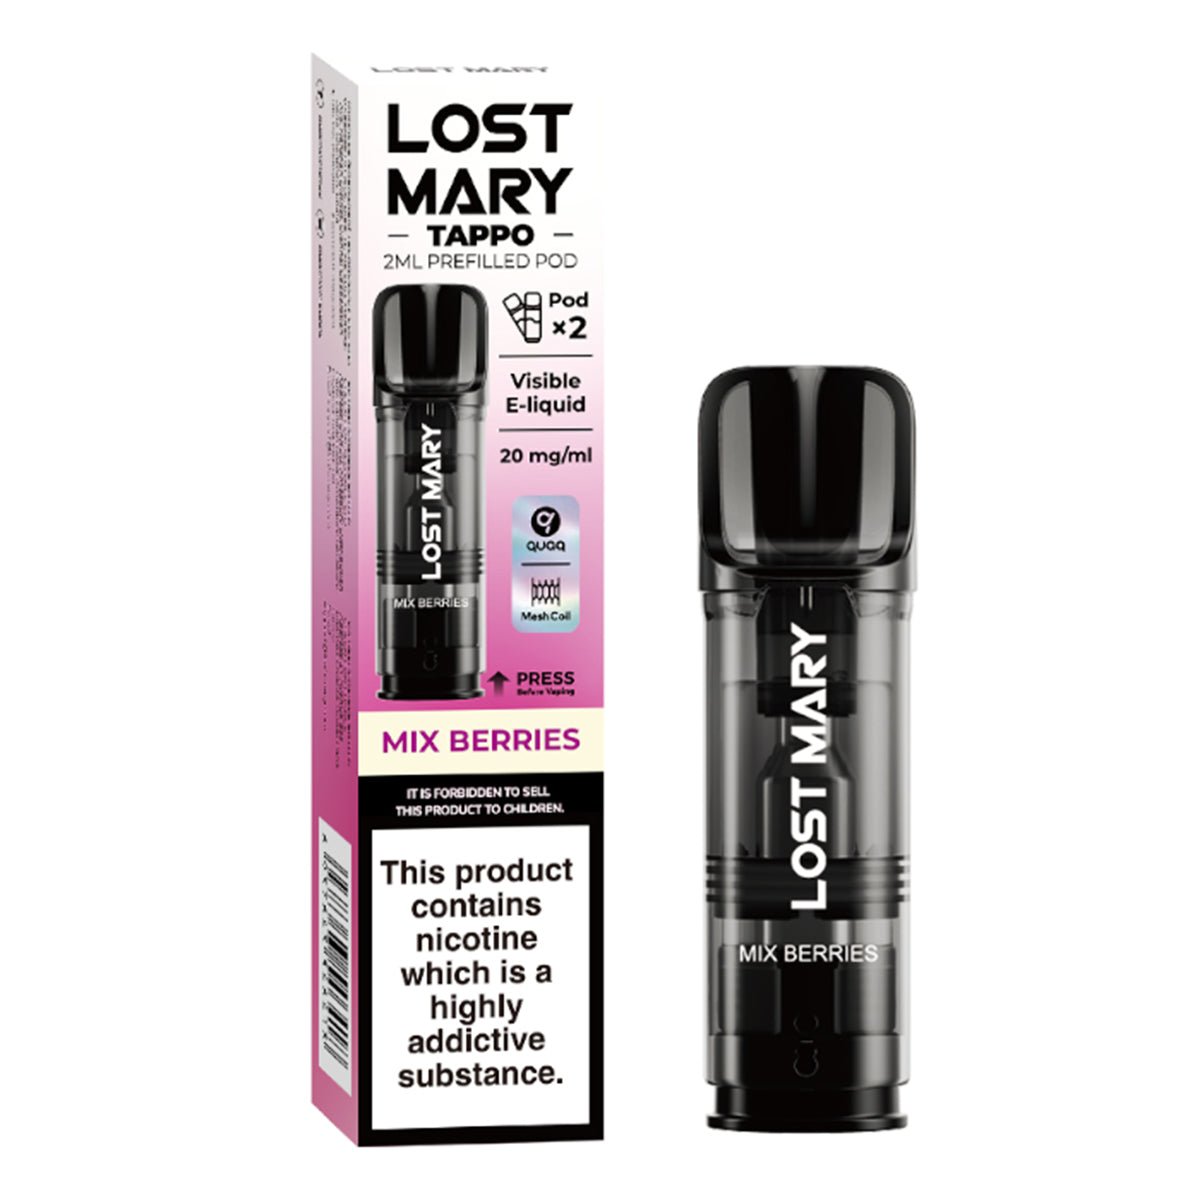 Mix Berries Tappo Pre-filled Pod by Lost Mary - Prime Vapes UK